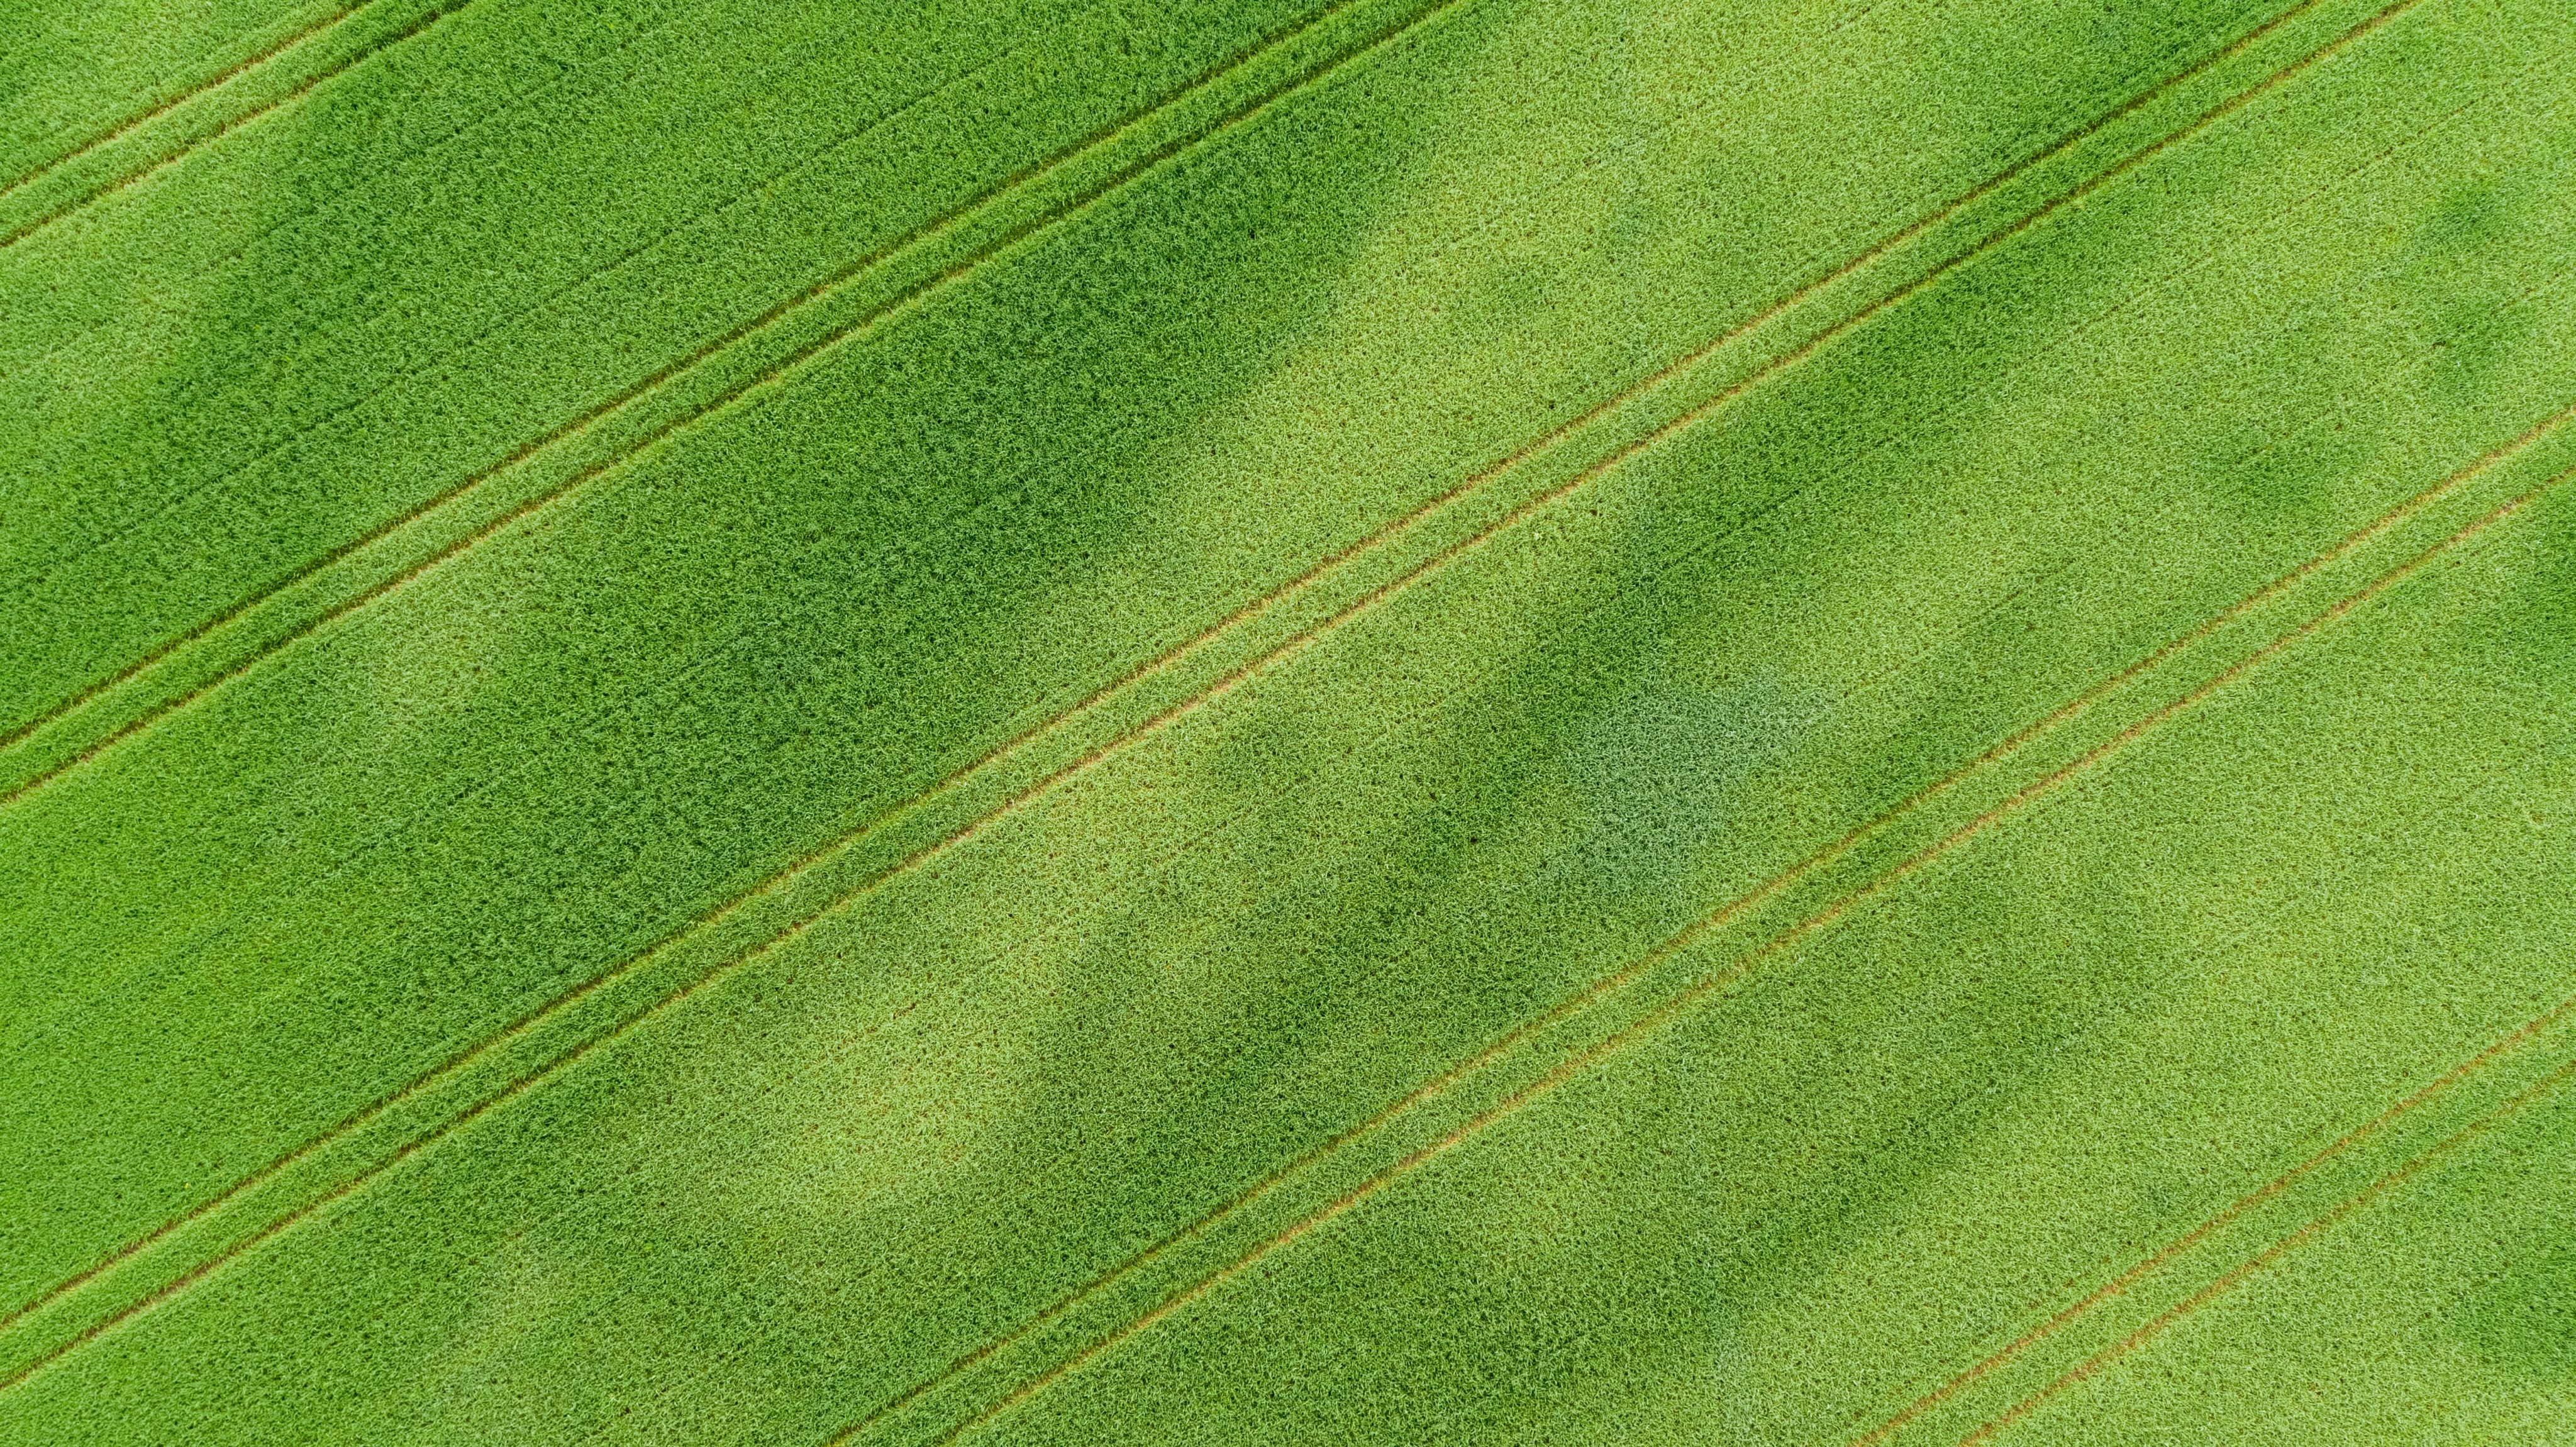 Green field with mowed stripes